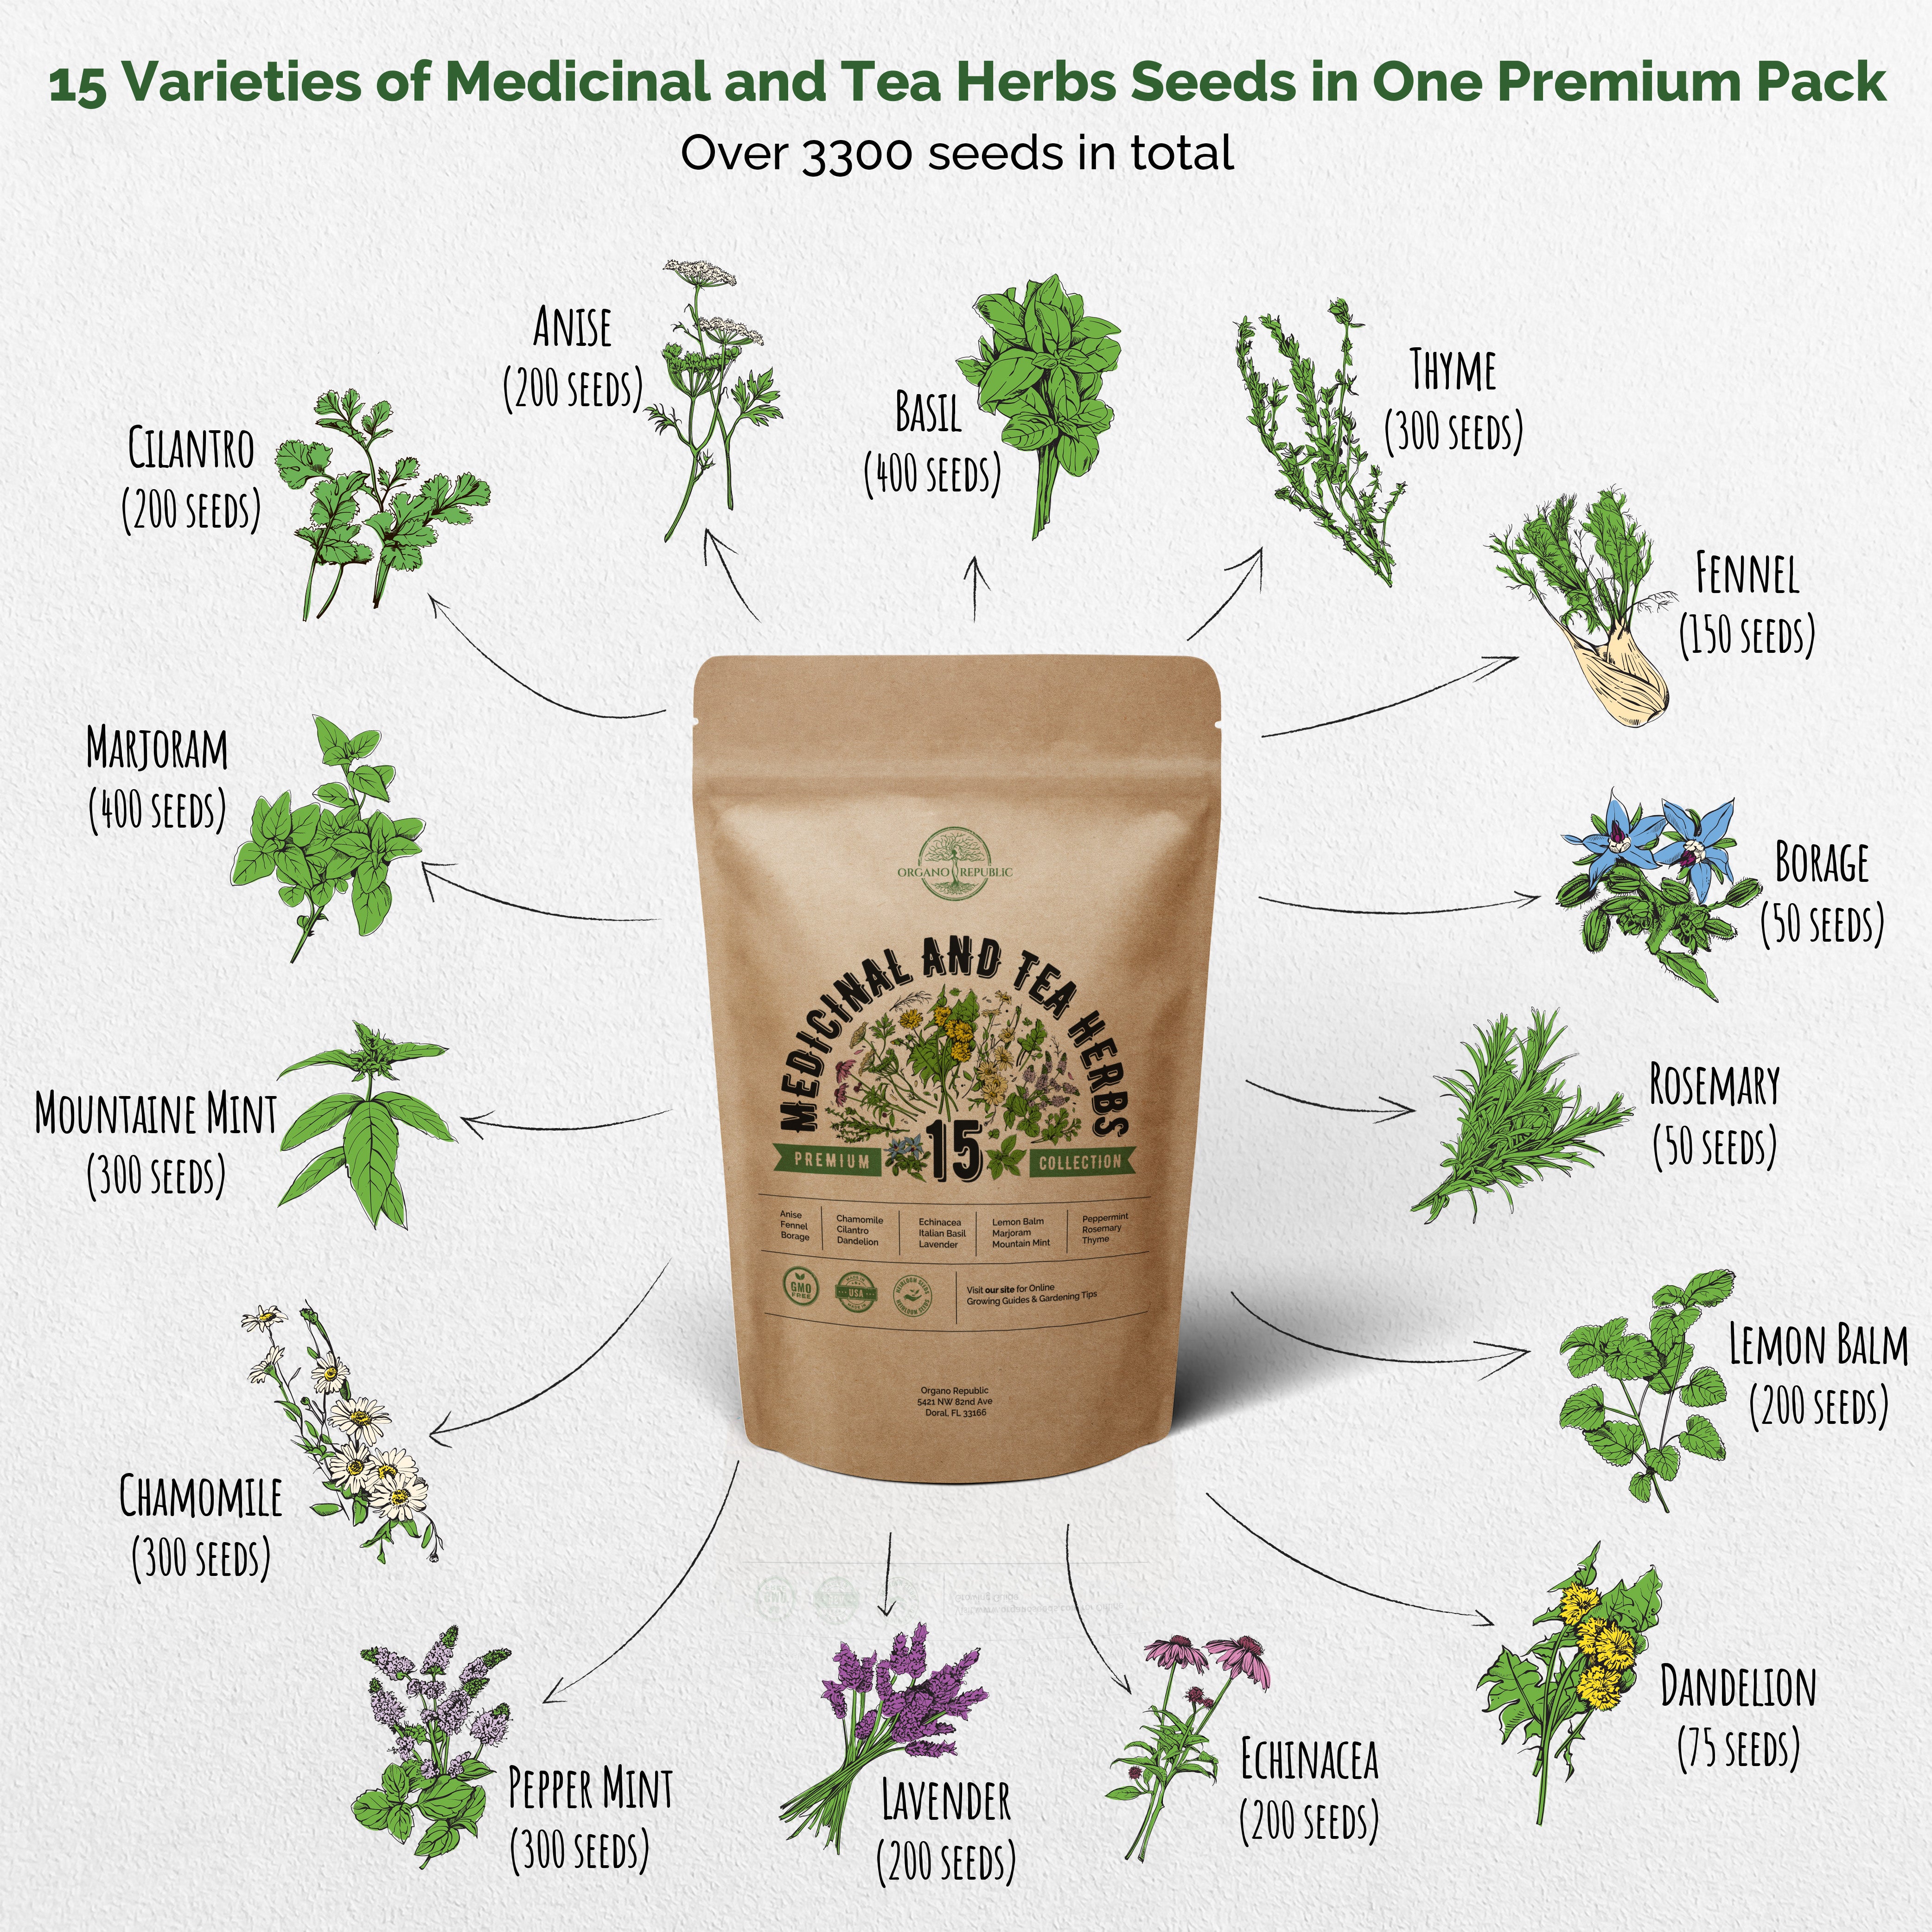 15 Medicinal and Tea Herbs Variety Pack - Over 3300 Non-GMO, Heirloom Seeds